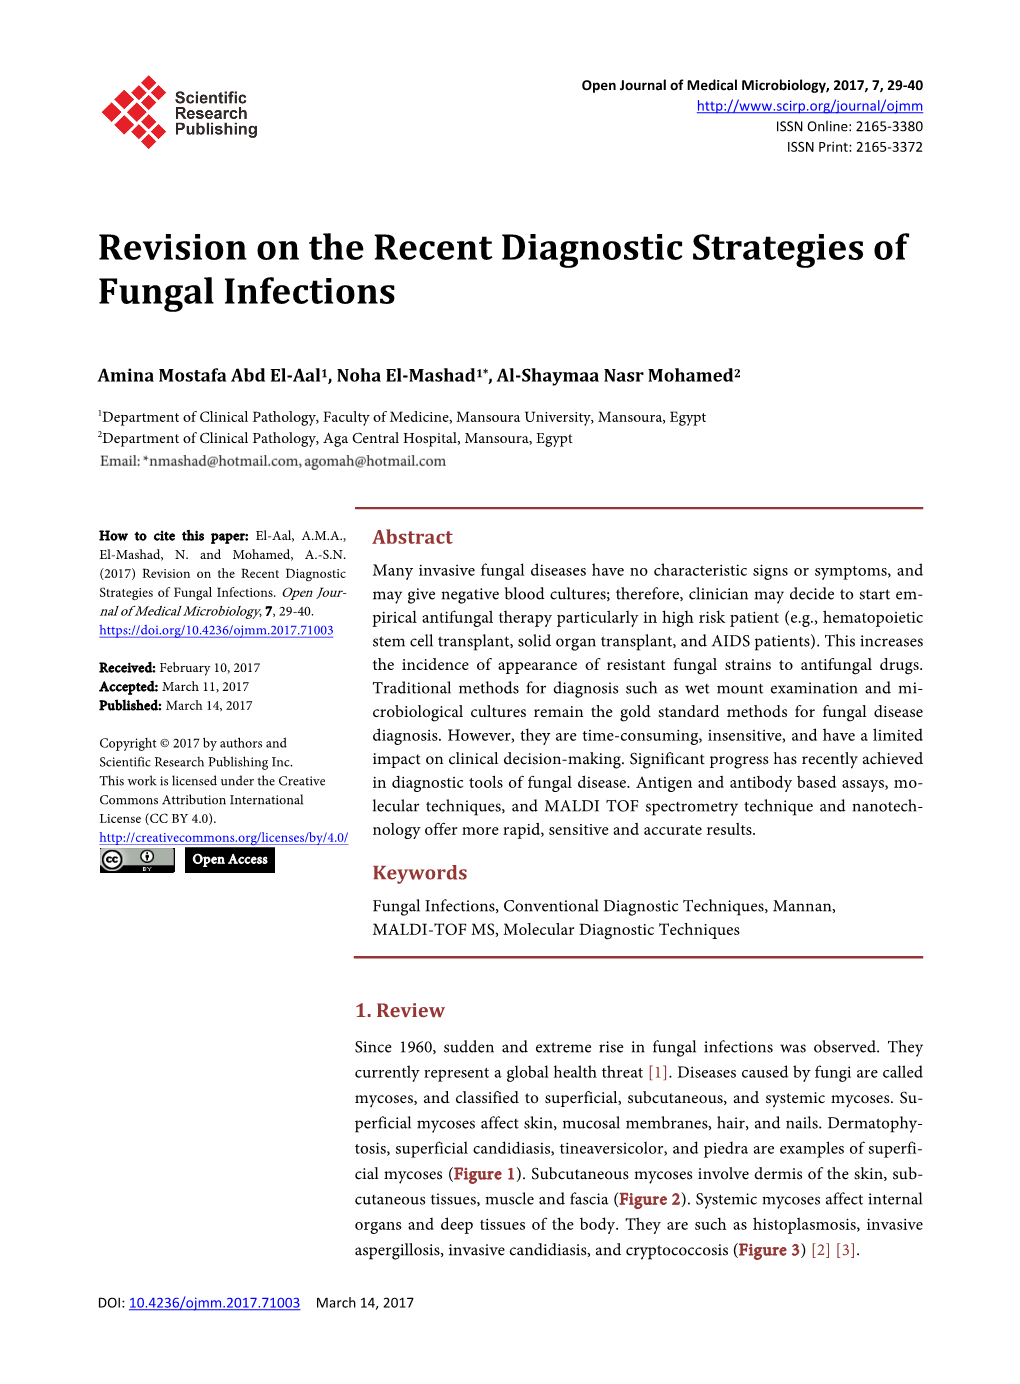 Revision on the Recent Diagnostic Strategies of Fungal Infections